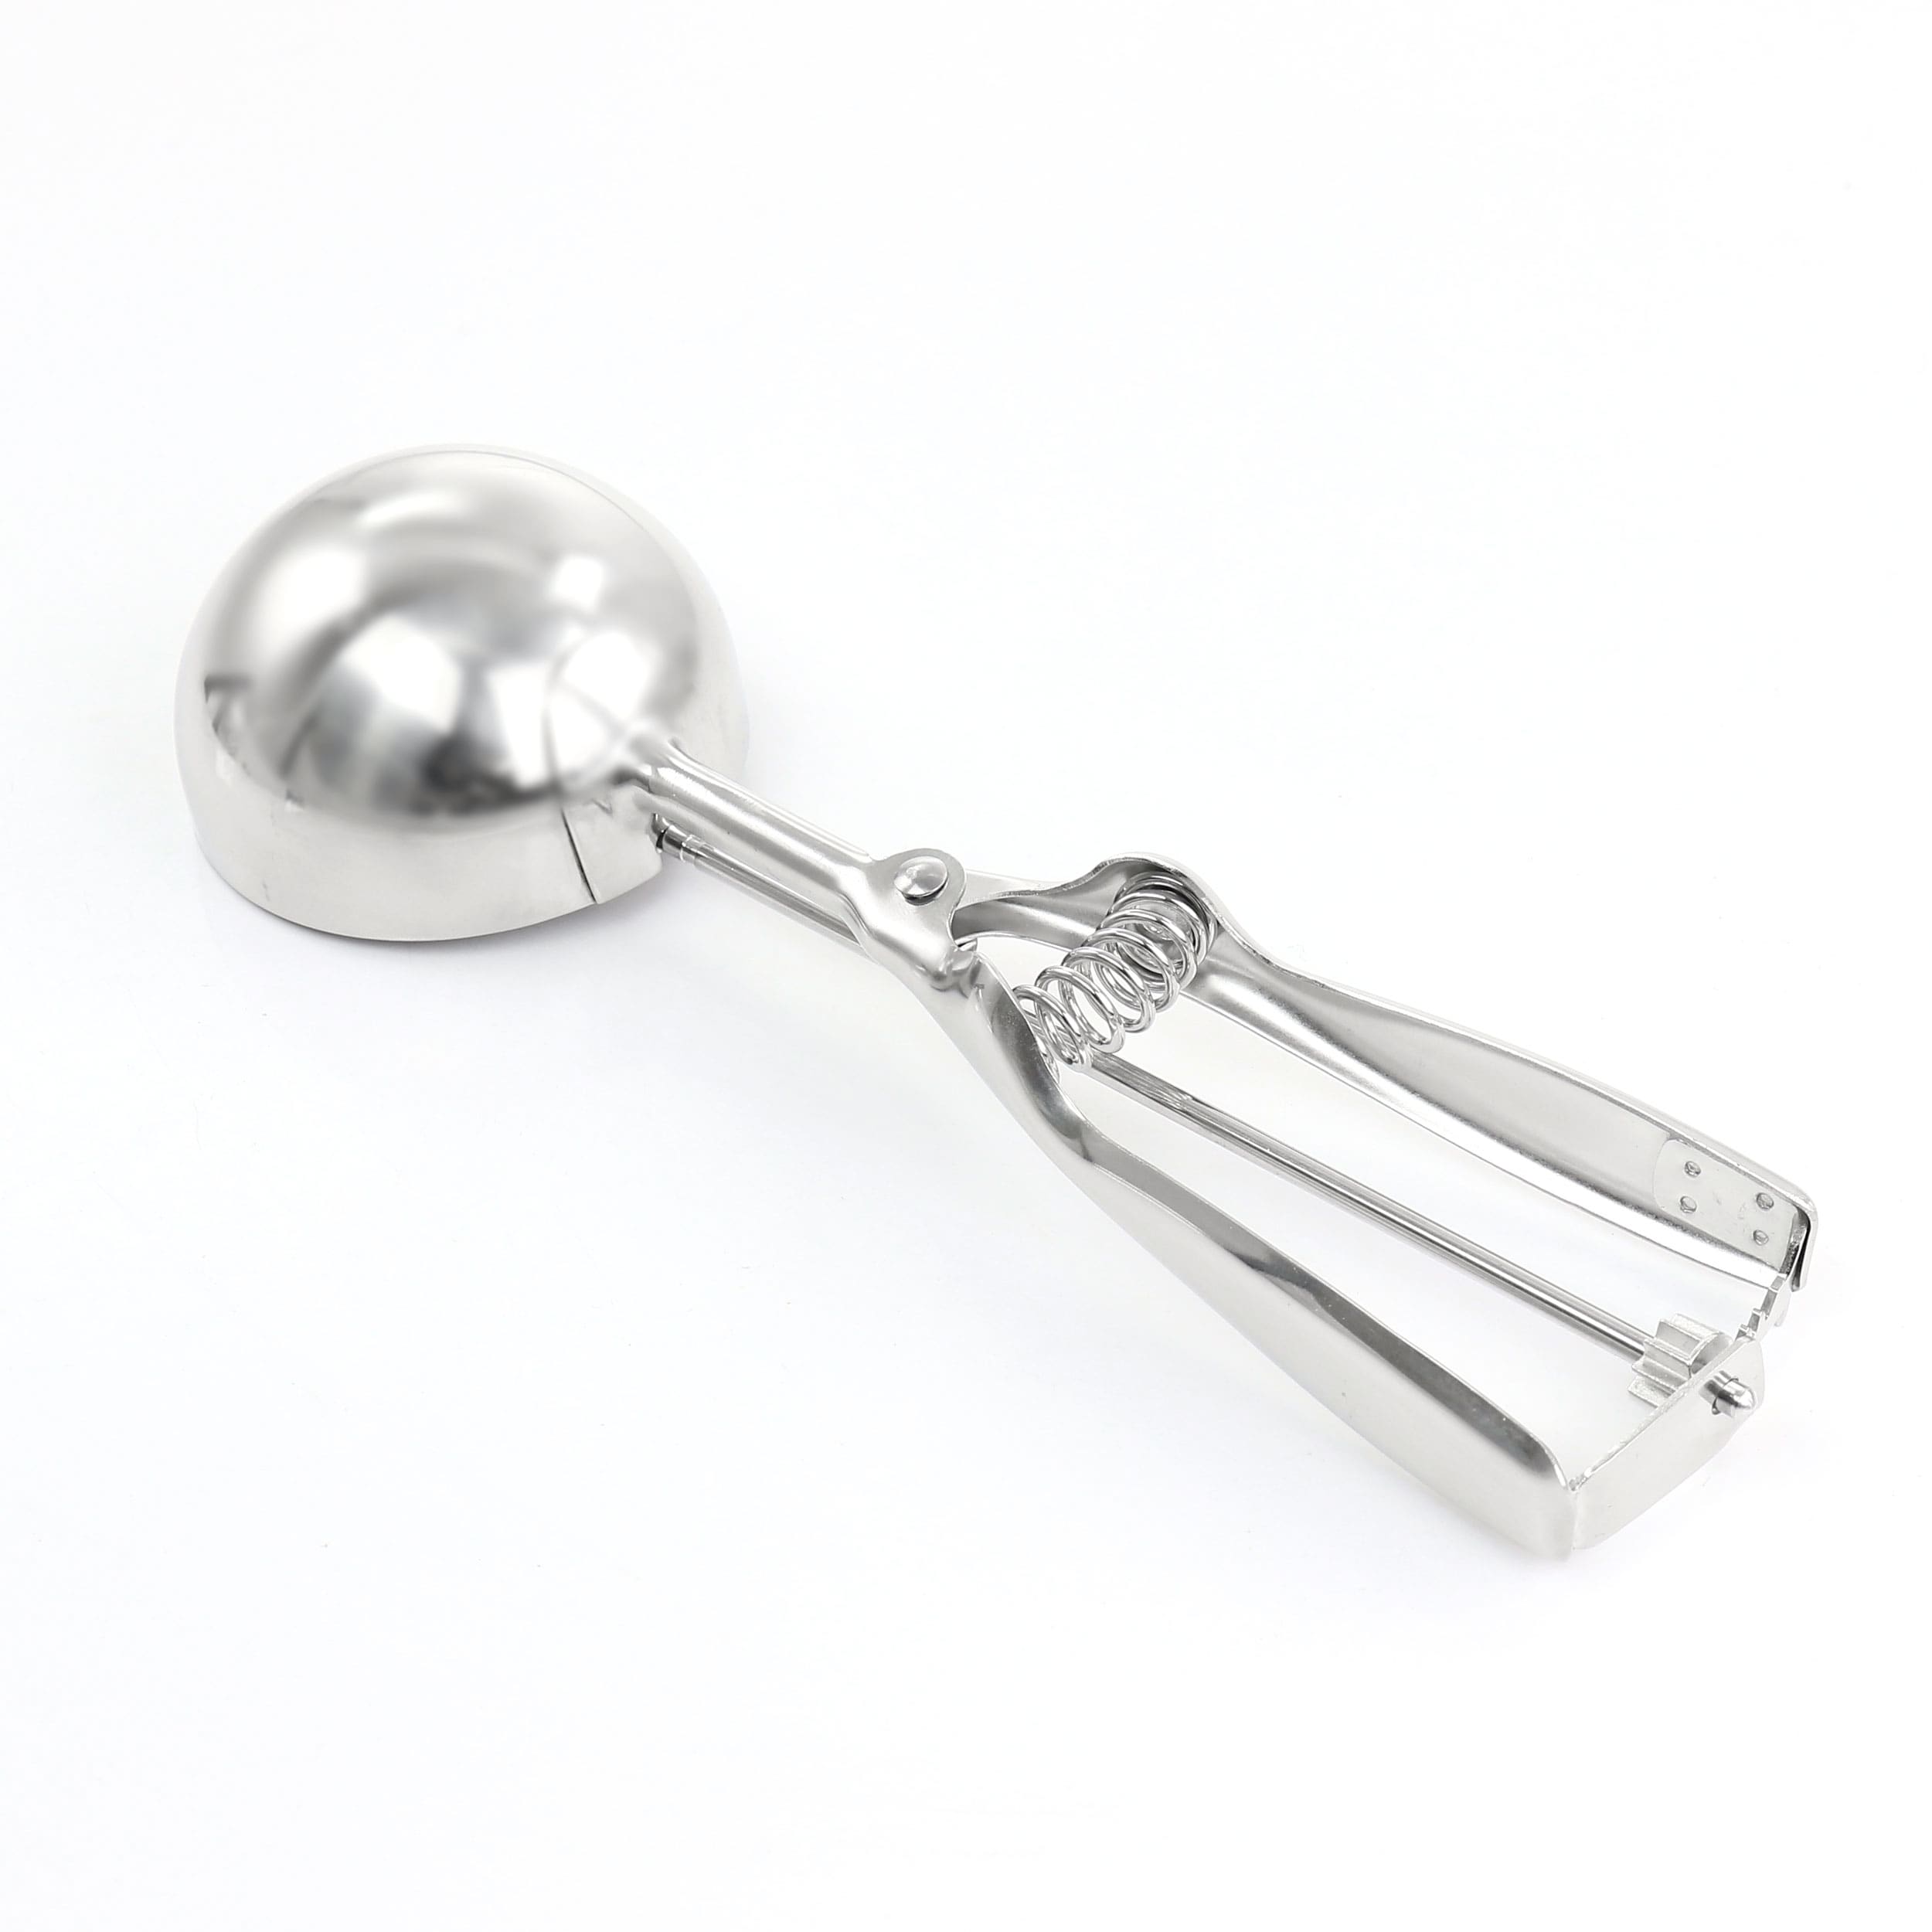 https://ak1.ostkcdn.com/images/products/is/images/direct/d37f13d02cd8ec5515ba267dc30b313daa0e0181/Marth-Stewart-Stainless-Steel-Kitchen-Scoop.jpg